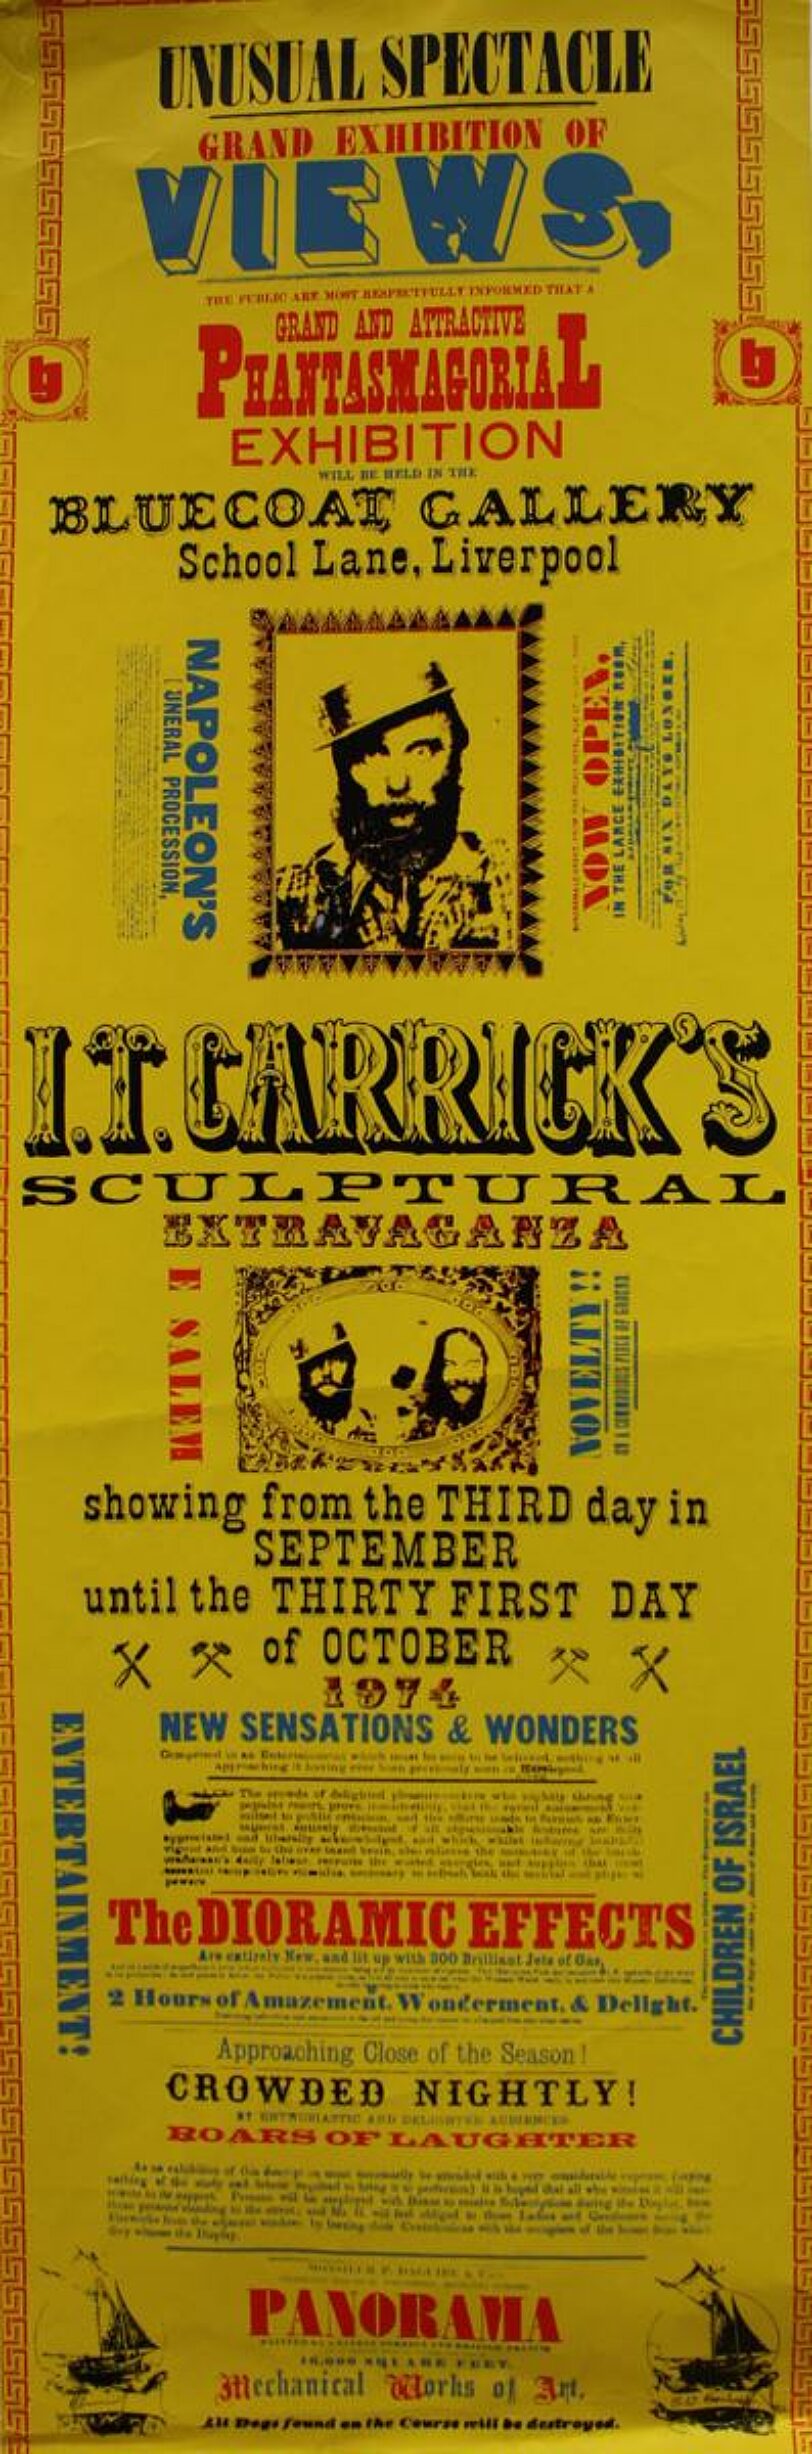 Poster for Ian Carrick's Scuptural Extravaganza exhibition